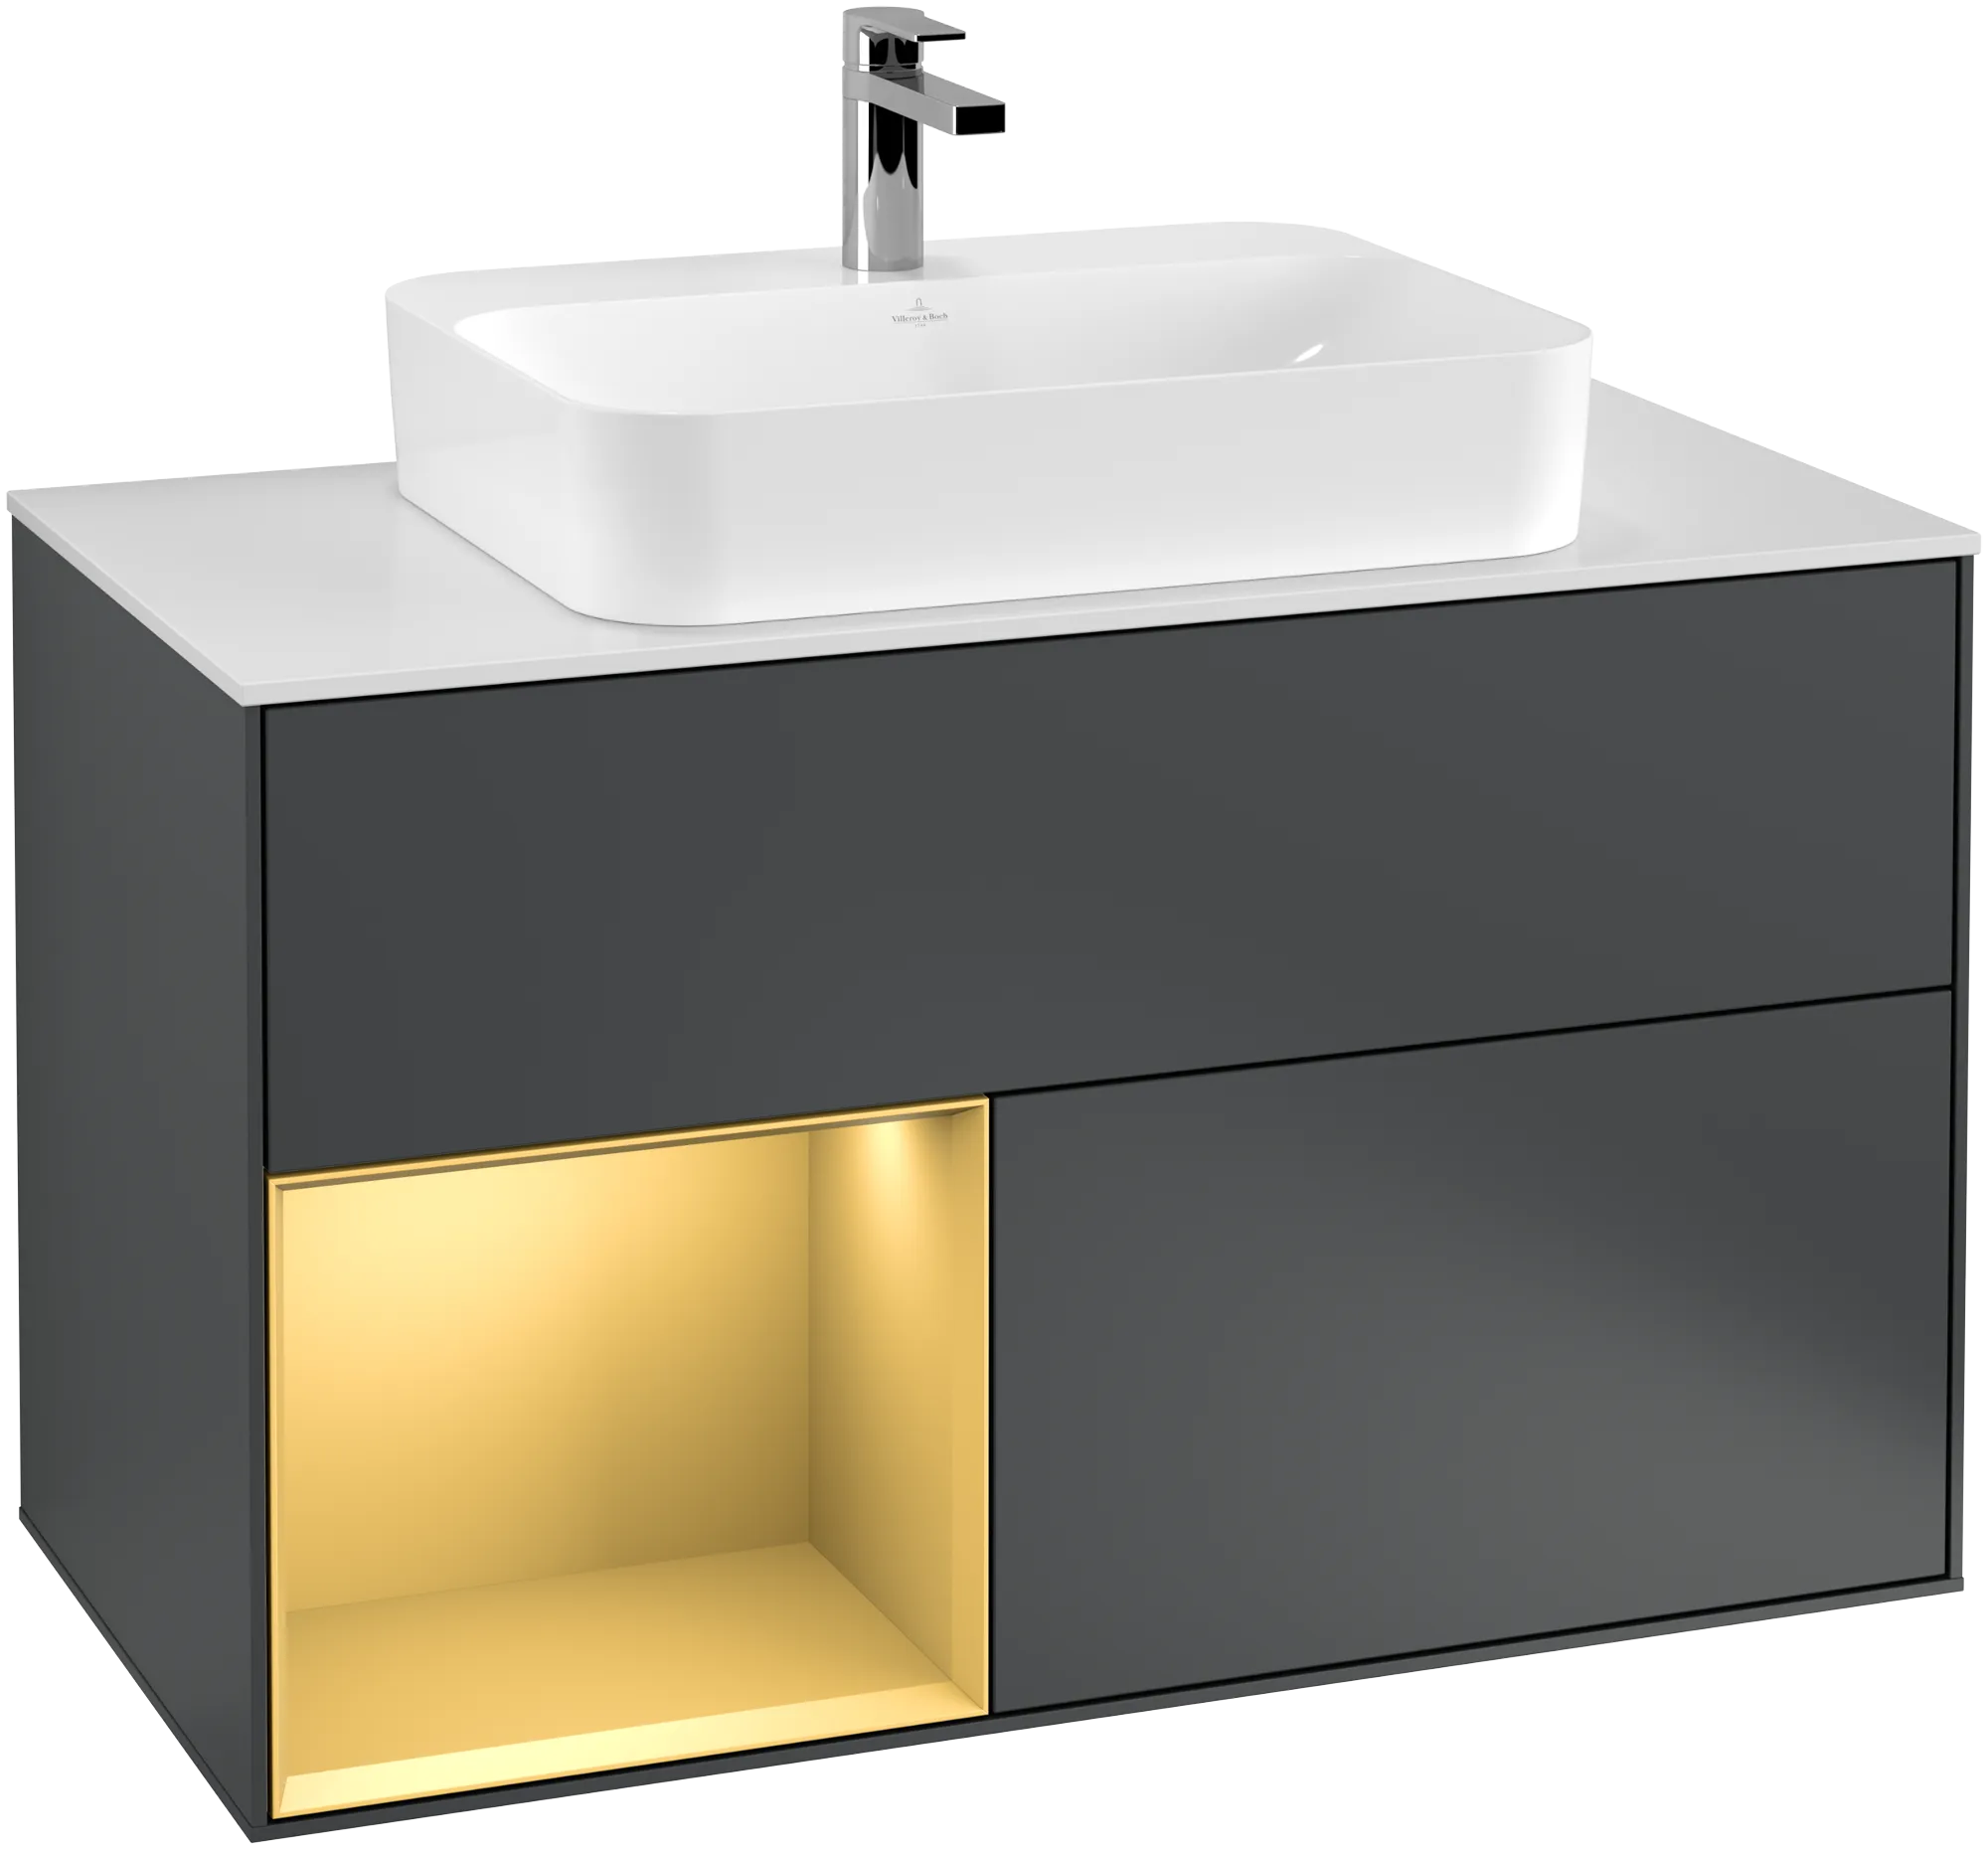 Picture of VILLEROY BOCH Finion Vanity unit, with lighting, 2 pull-out compartments, 1000 x 603 x 501 mm, Midnight Blue Matt Lacquer / Gold Matt Lacquer / Glass White Matt #G361HFHG